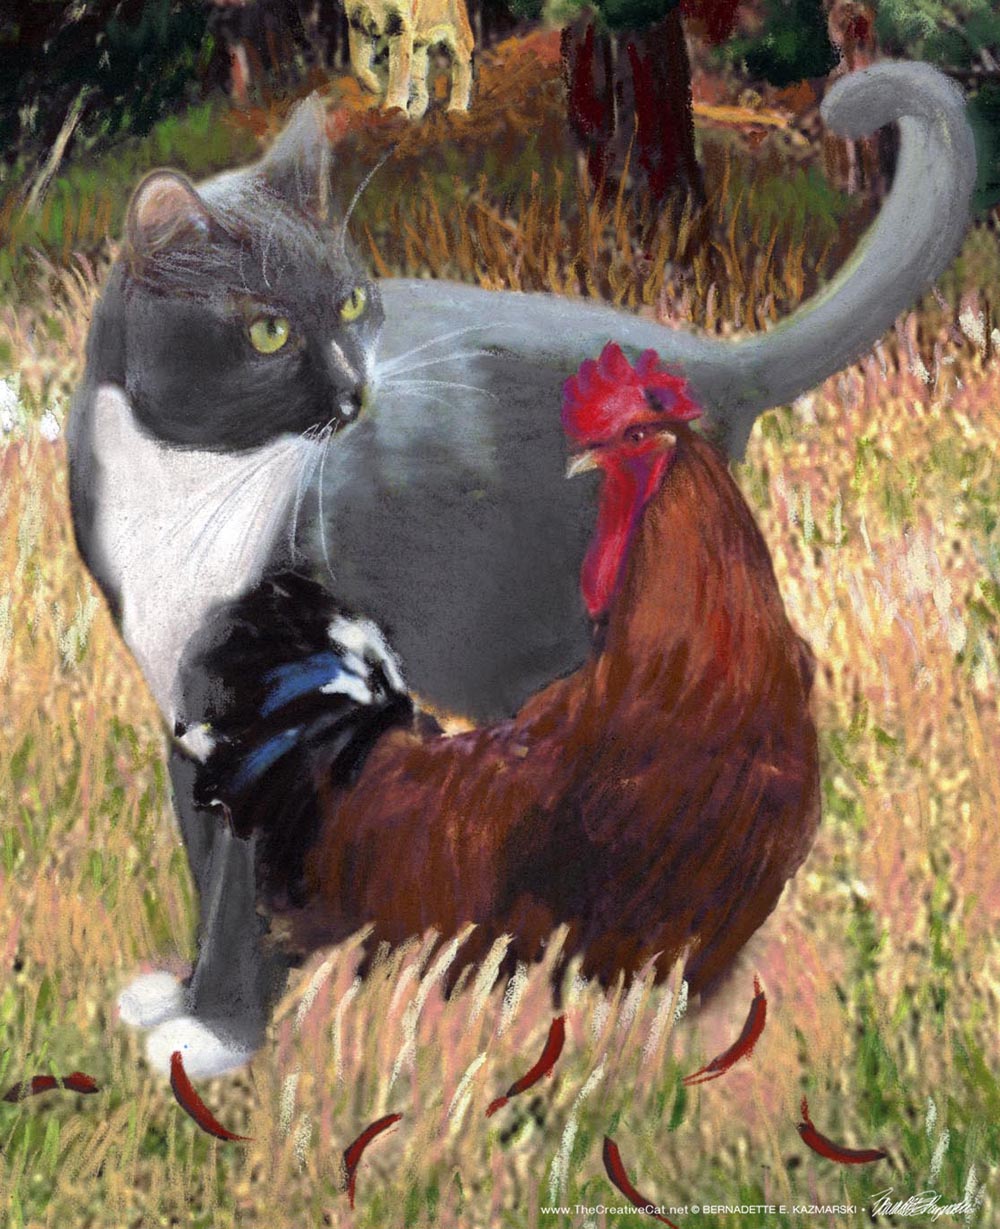 cat and chicken